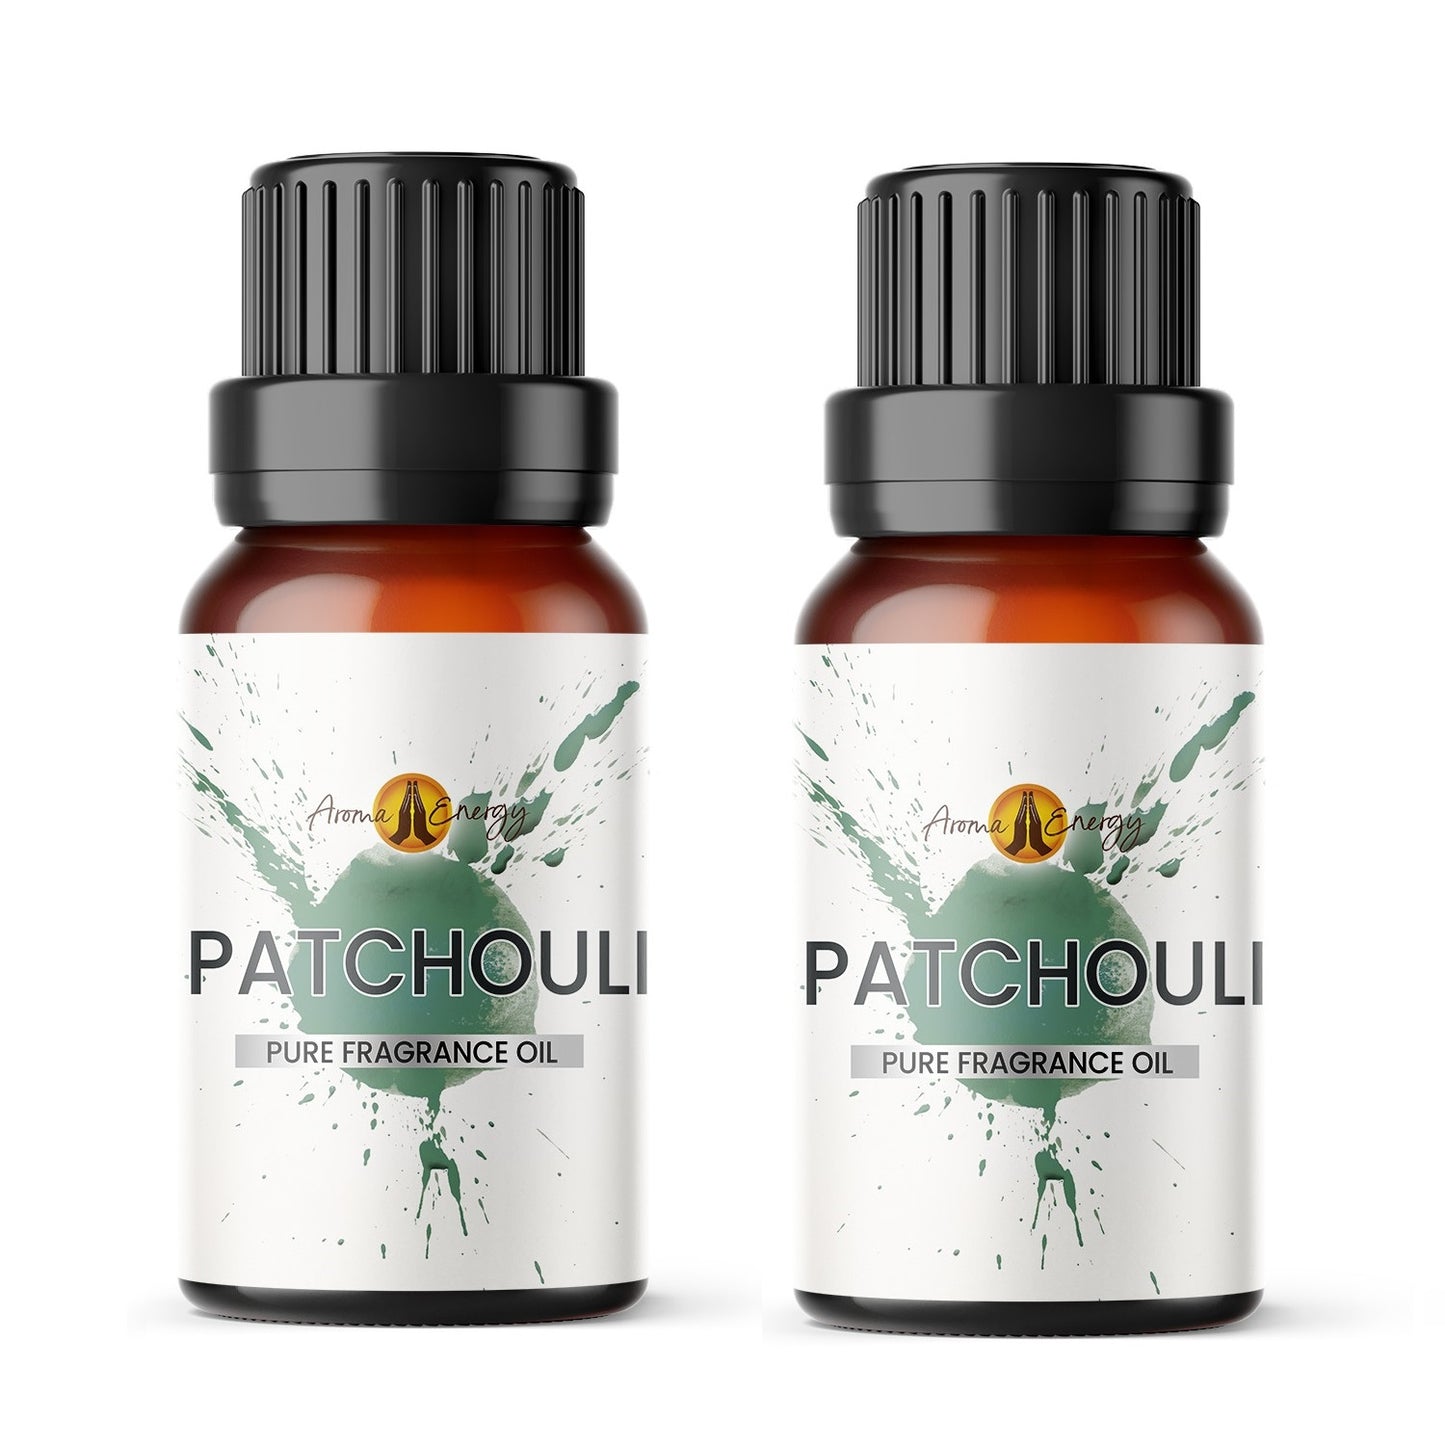 Patchouli Fragrance Oil - Aroma Energy